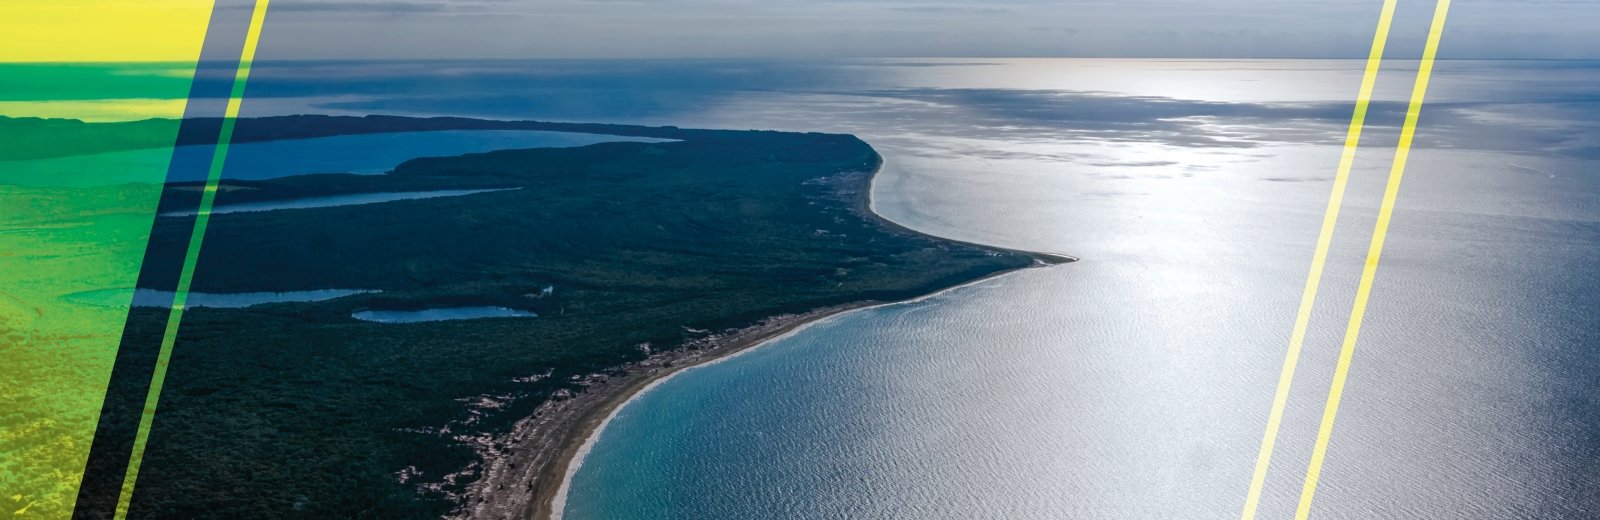 Aerial view of the Mackinac Straits.